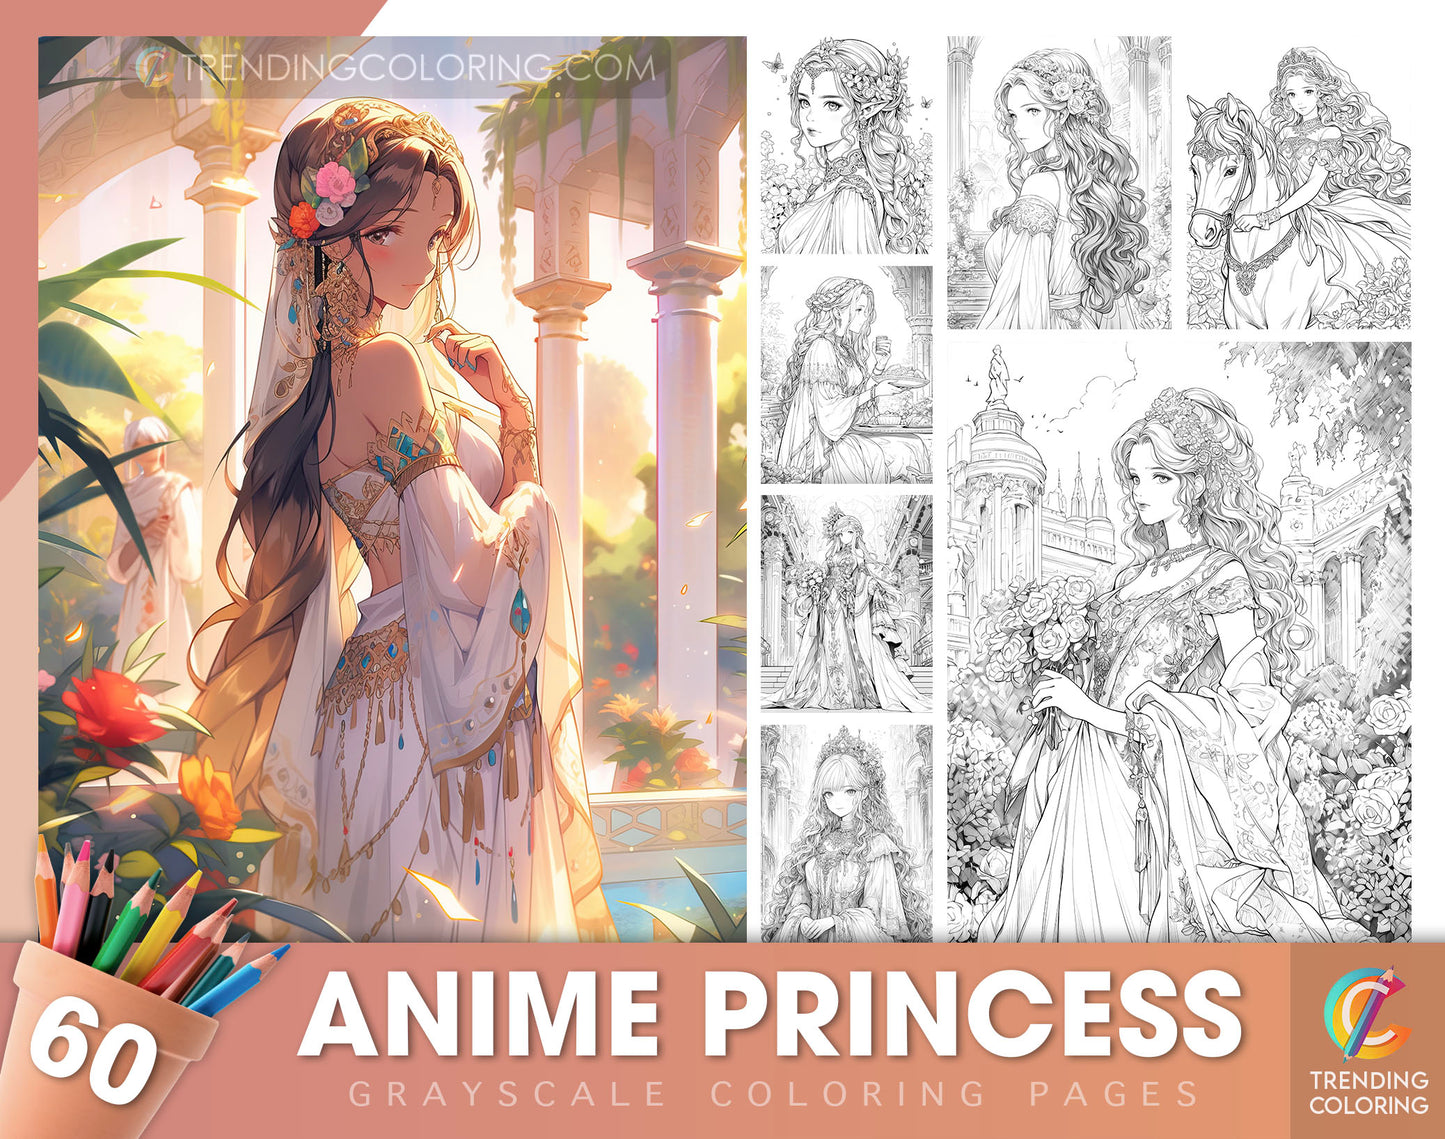 60 Anime Princess Grayscale Coloring Pages - Instant Download - Printable Dark/Light